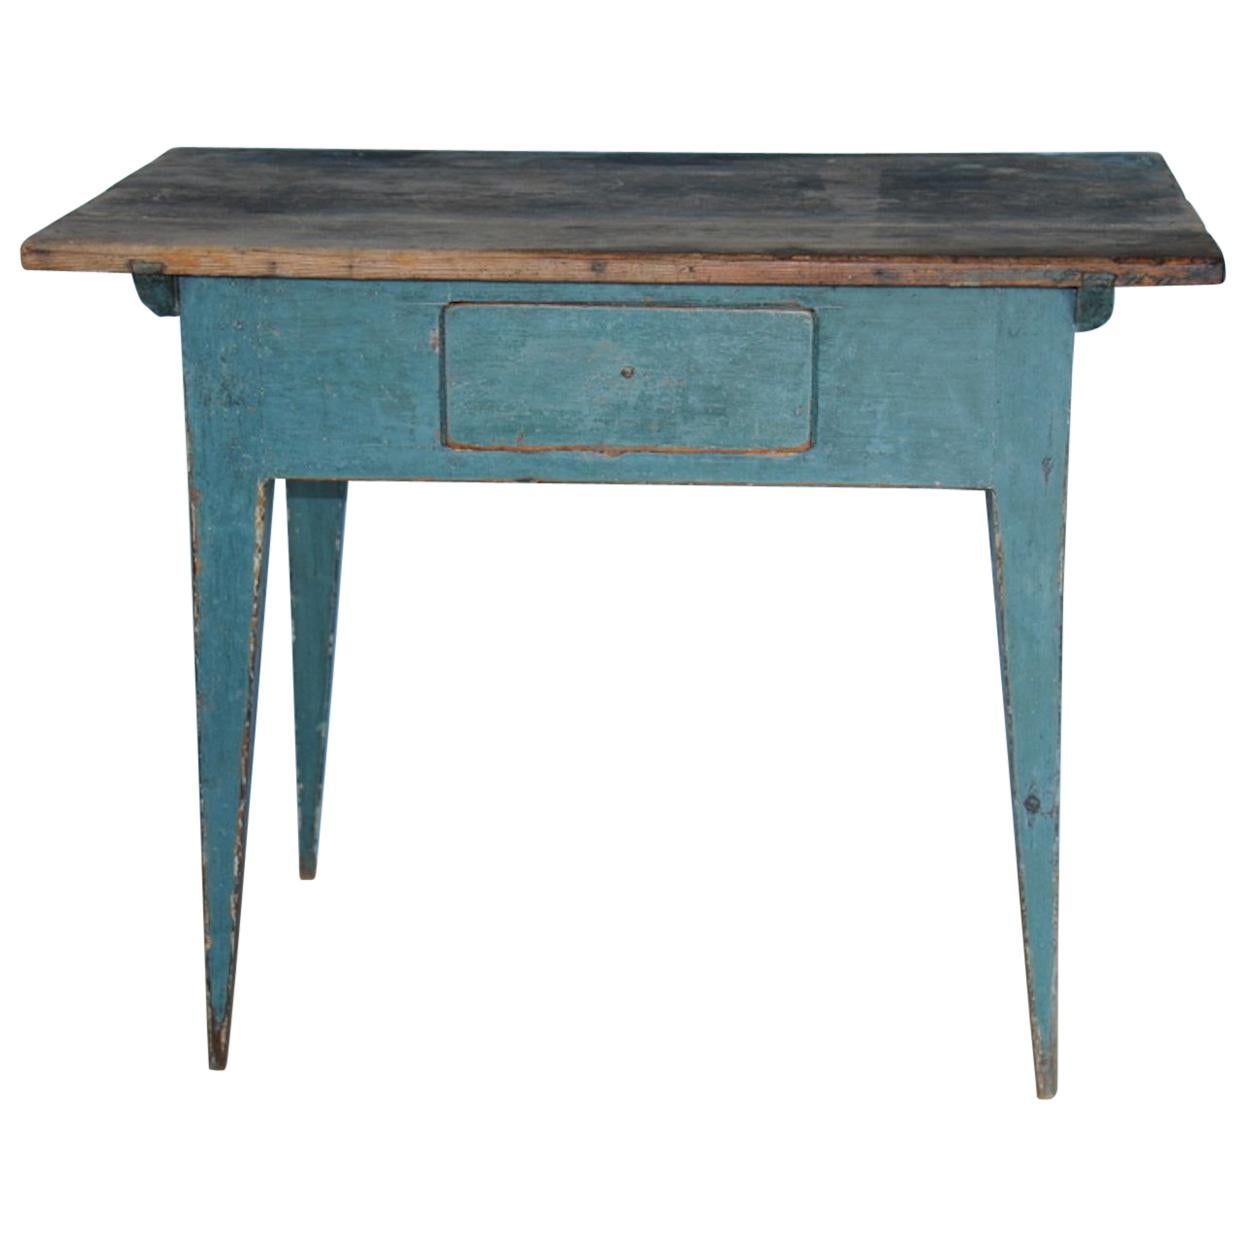 Gustavian Swedish Table with Drawer with Original Blue Paint, circa 1790